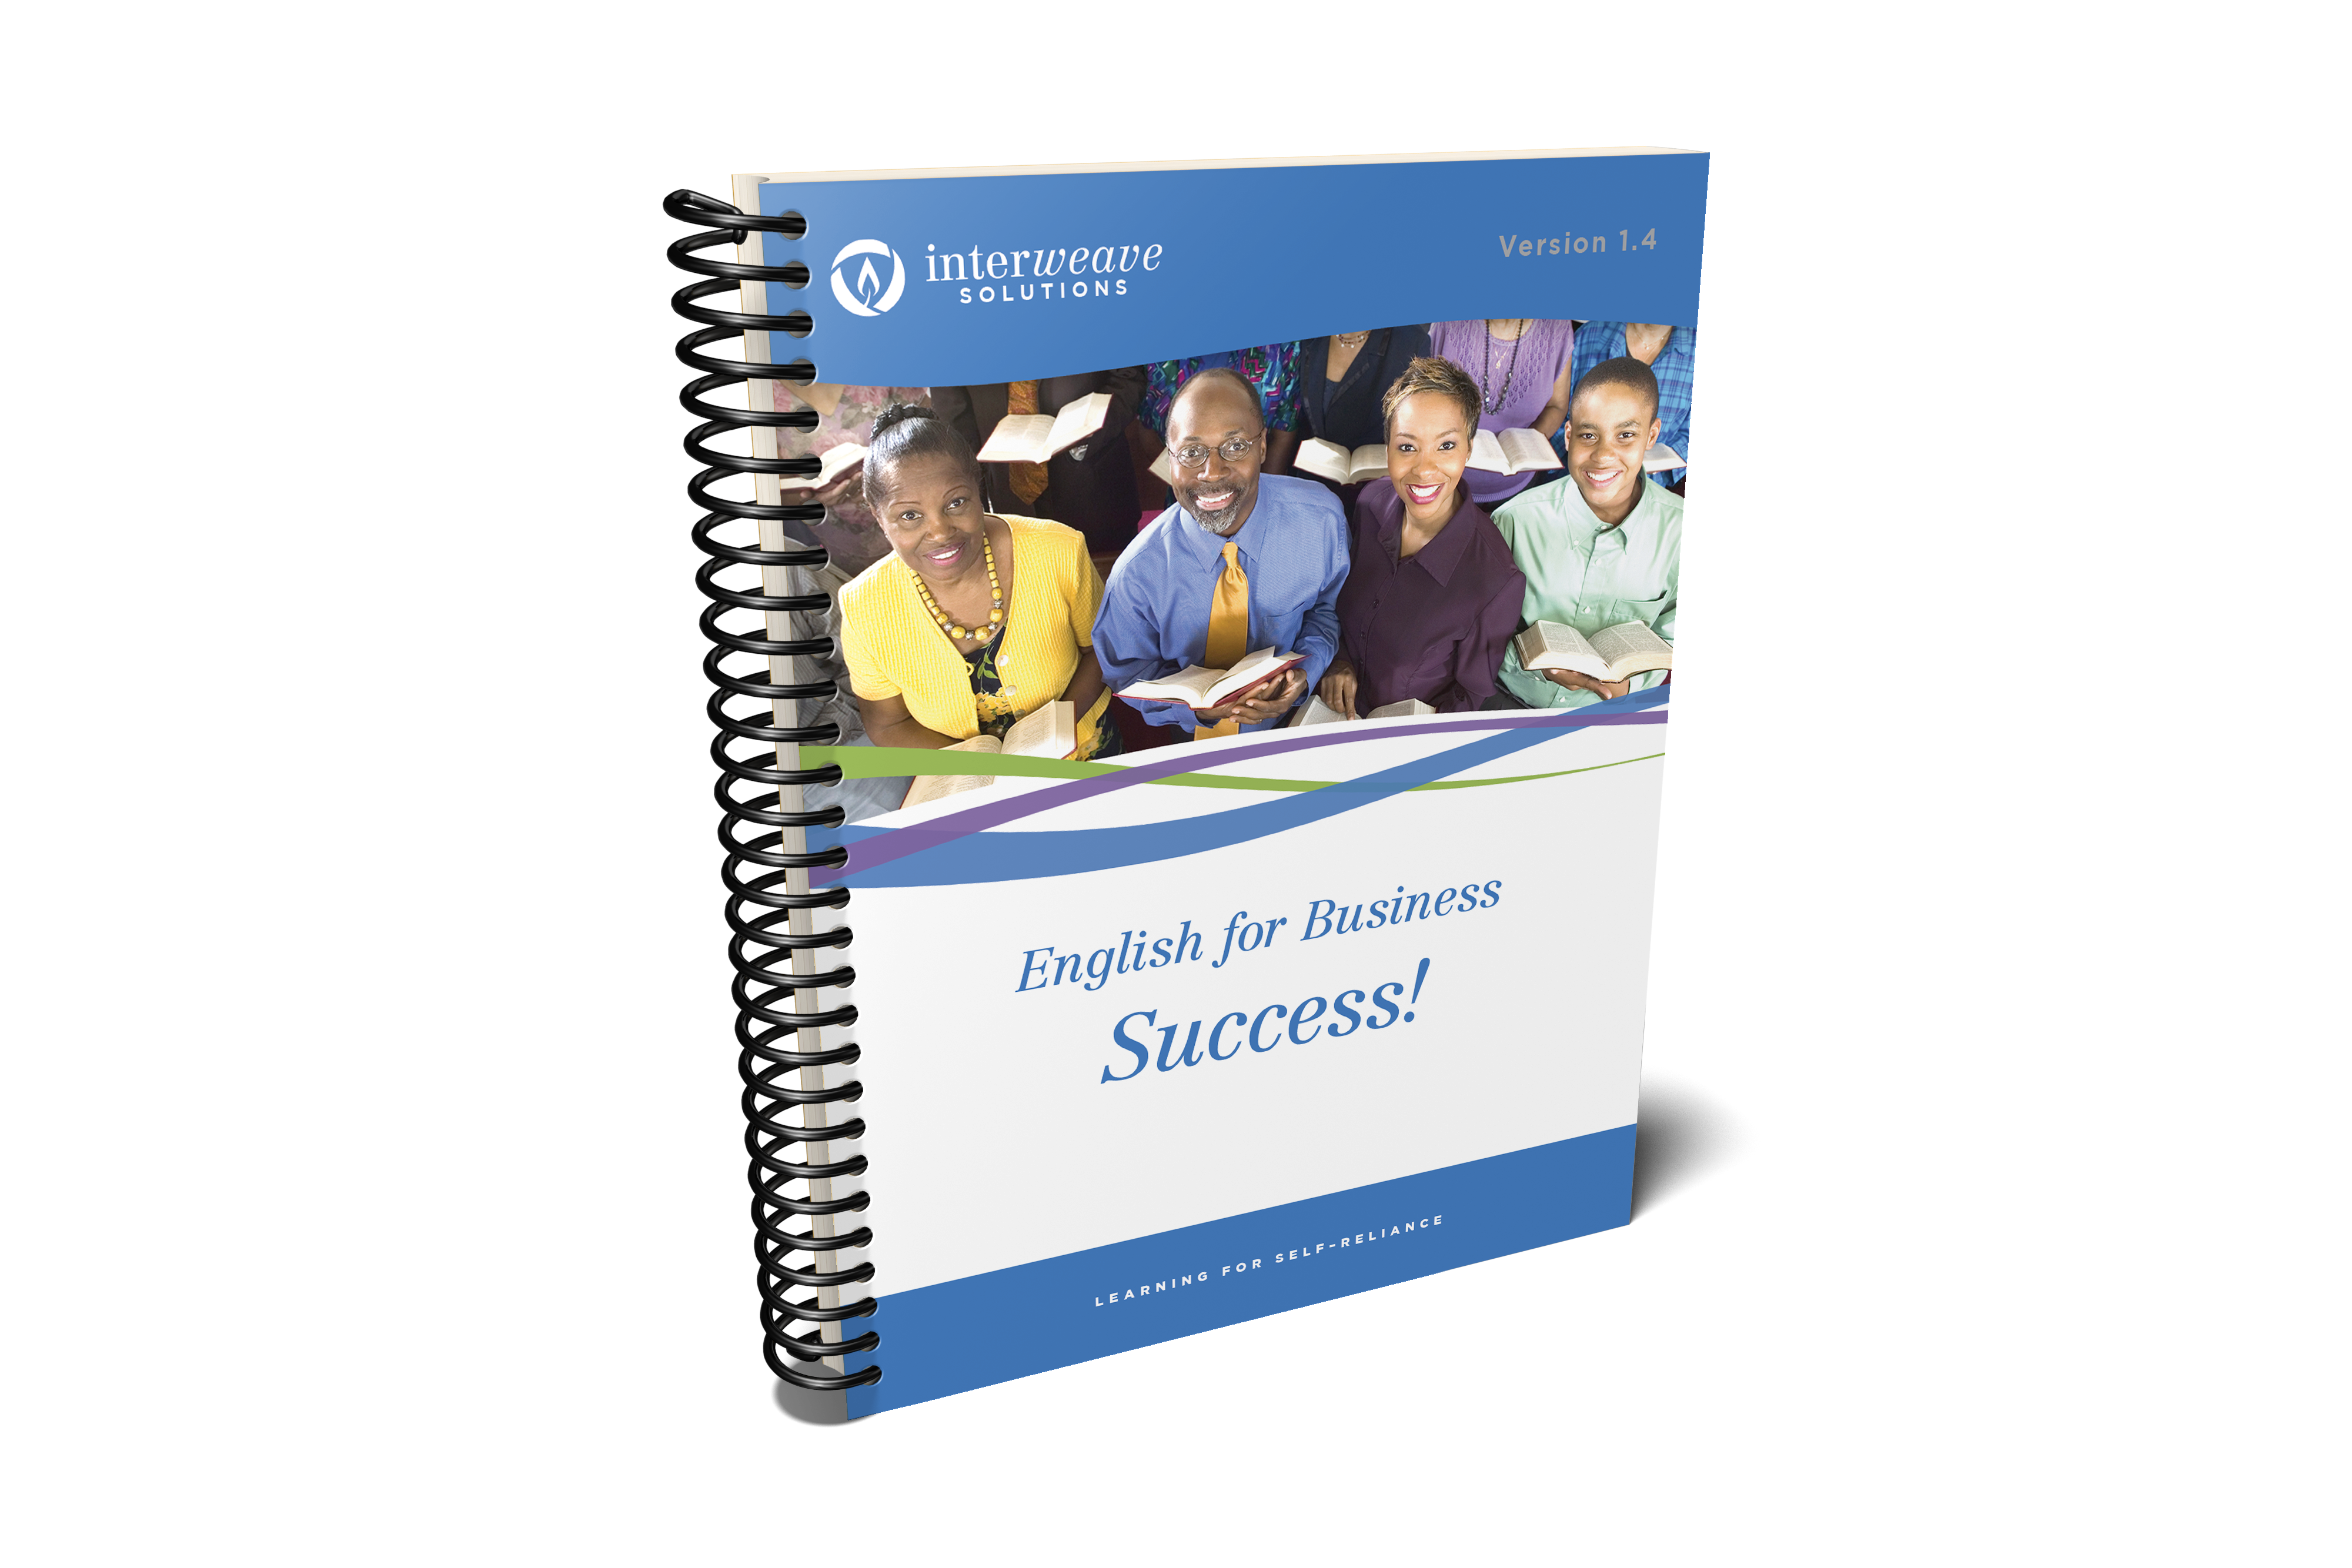 To download English for Business Success, please click here.